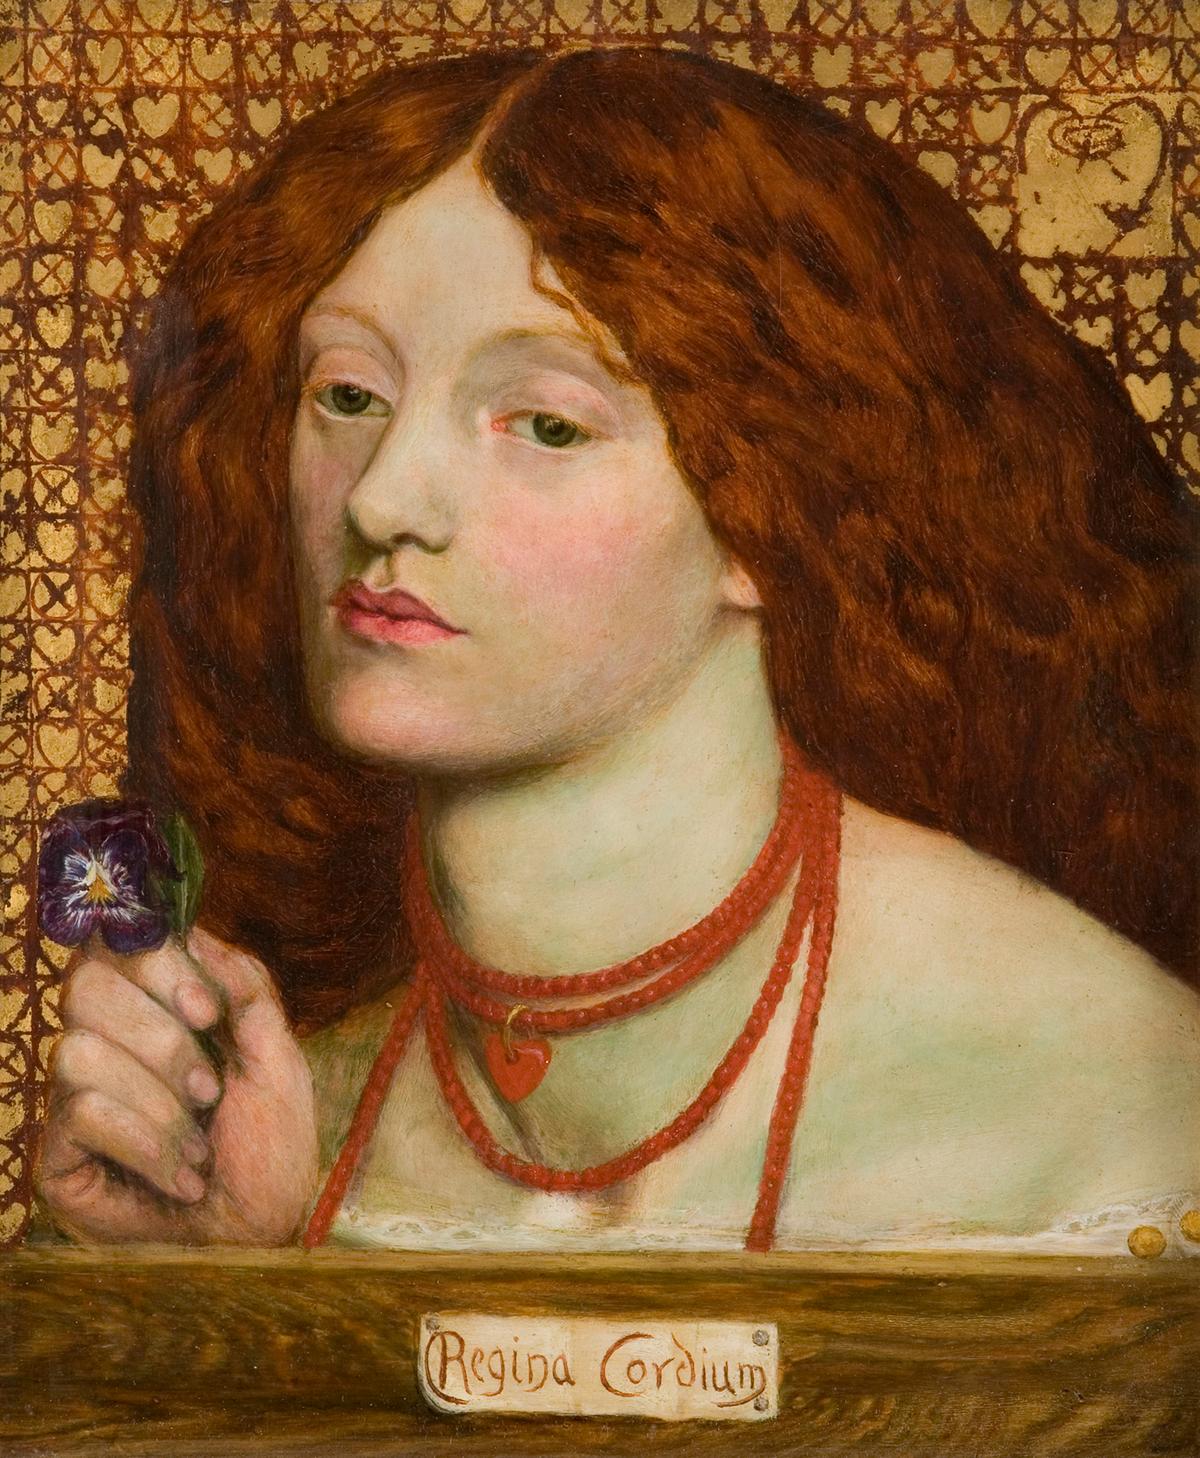 Rossetti's 1860 marriage portrait of Siddal. "Regina Cordium,"1860, by  Dante Gabriel Rossetti. Oil on canvas; 10 inches by 8 inches. Johannesburg Art Gallery, South Africa. (Public Domain)